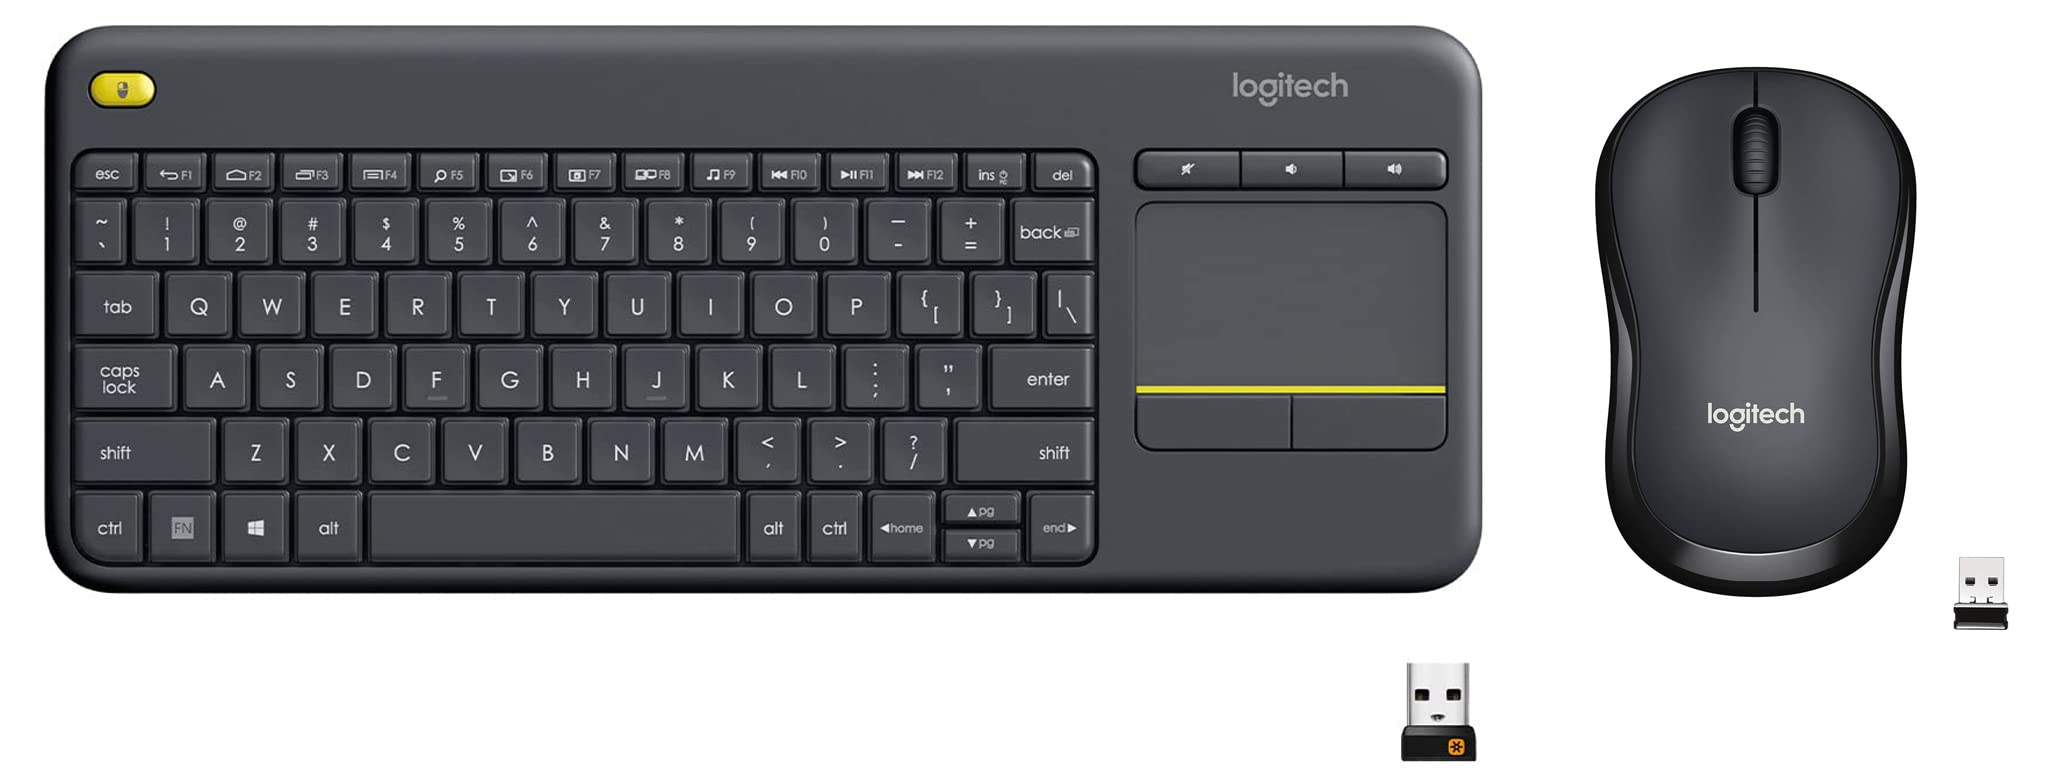 (Open Box) Logitech K400 Plus Wireless Touch TV Keyboard with Easy Media Control and Built-in Touchpad, HTPC Keyboard for PC-Connected TV, Windows, Android, Chrome OS, Laptop, Tablet - Black (Grade - A+)